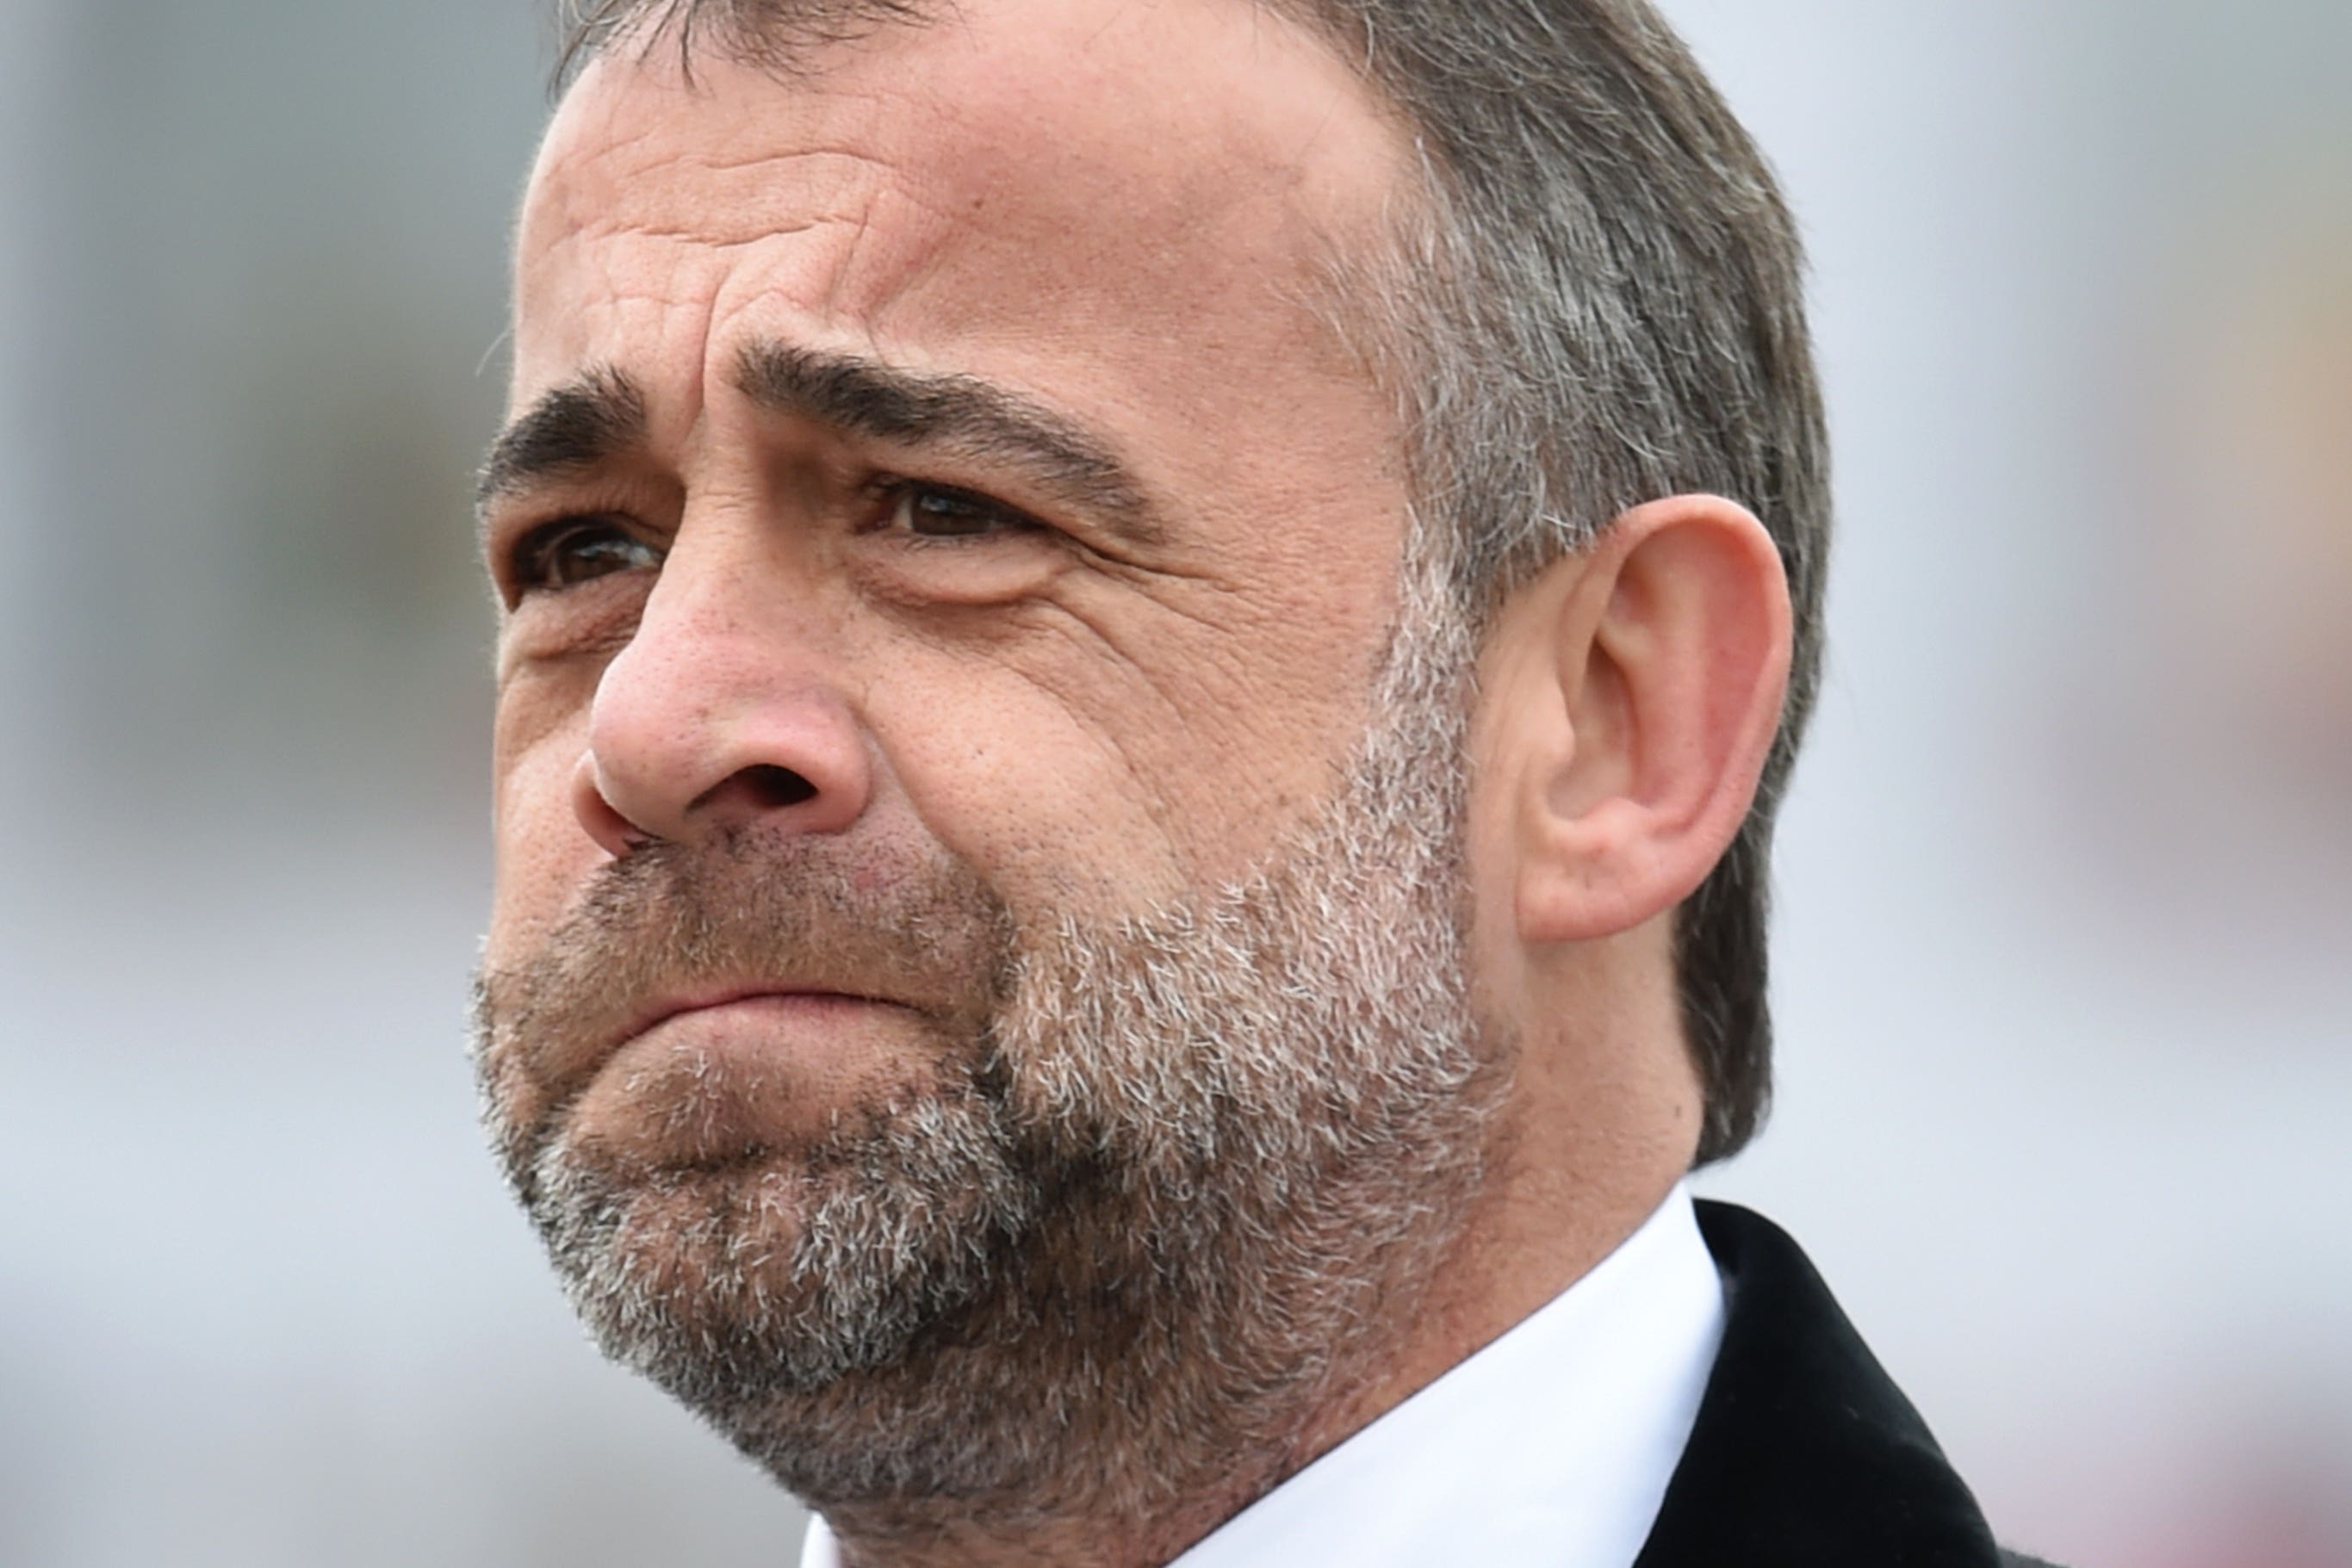 Actor Michael Le Vell, whose real name is Michael Turner, is bringing a damages claim against Mirror Group Newspapers over alleged unlawful information gathering (Joe Giddens/PA)